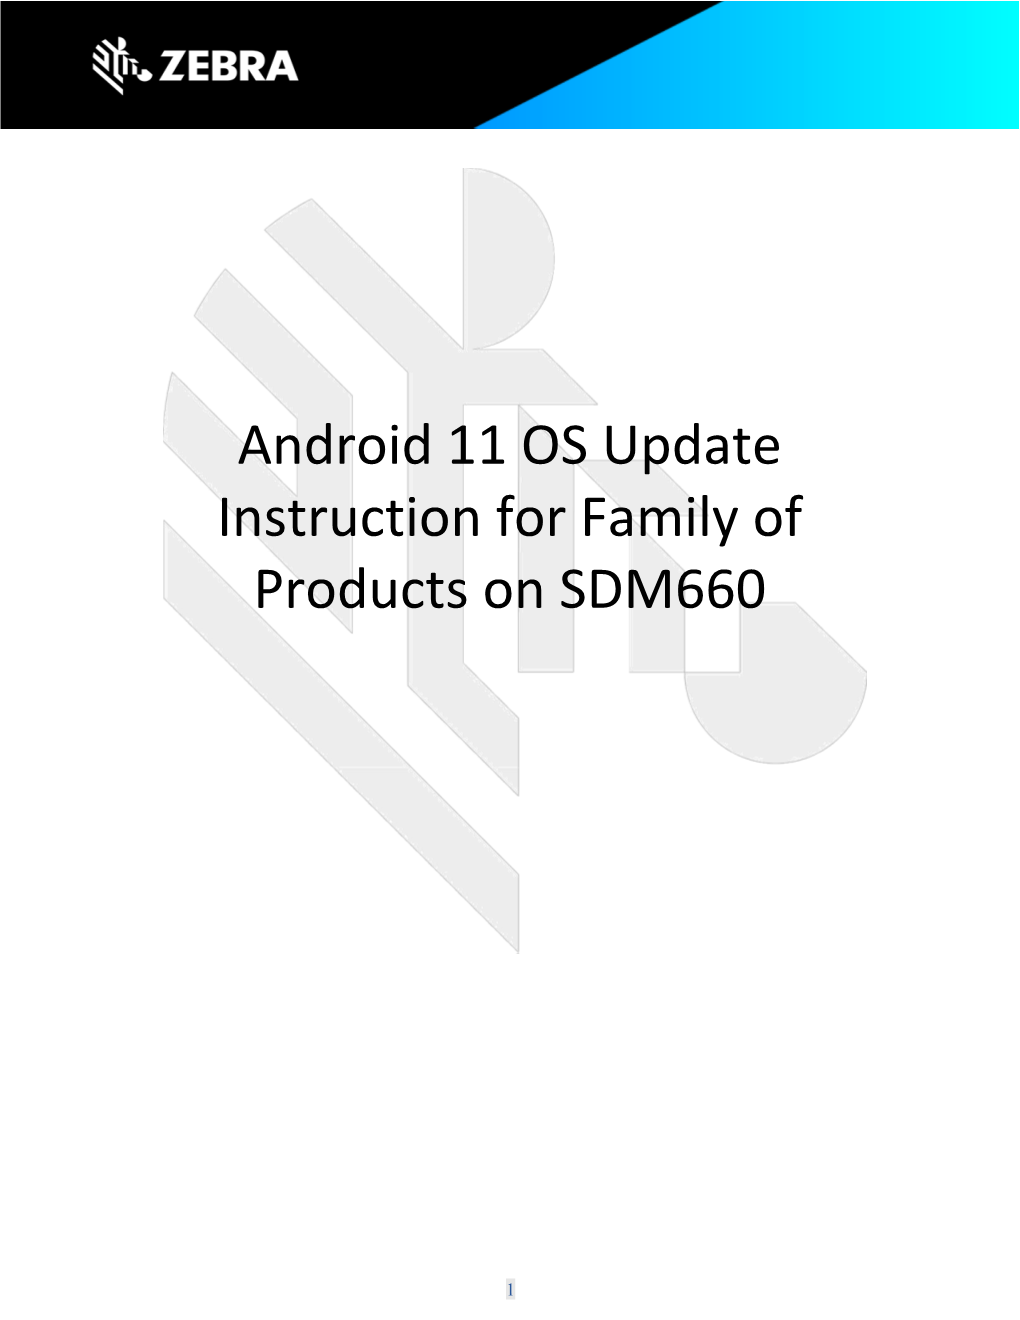 Android 11 OS Update Instruction for Family of Products on SDM660